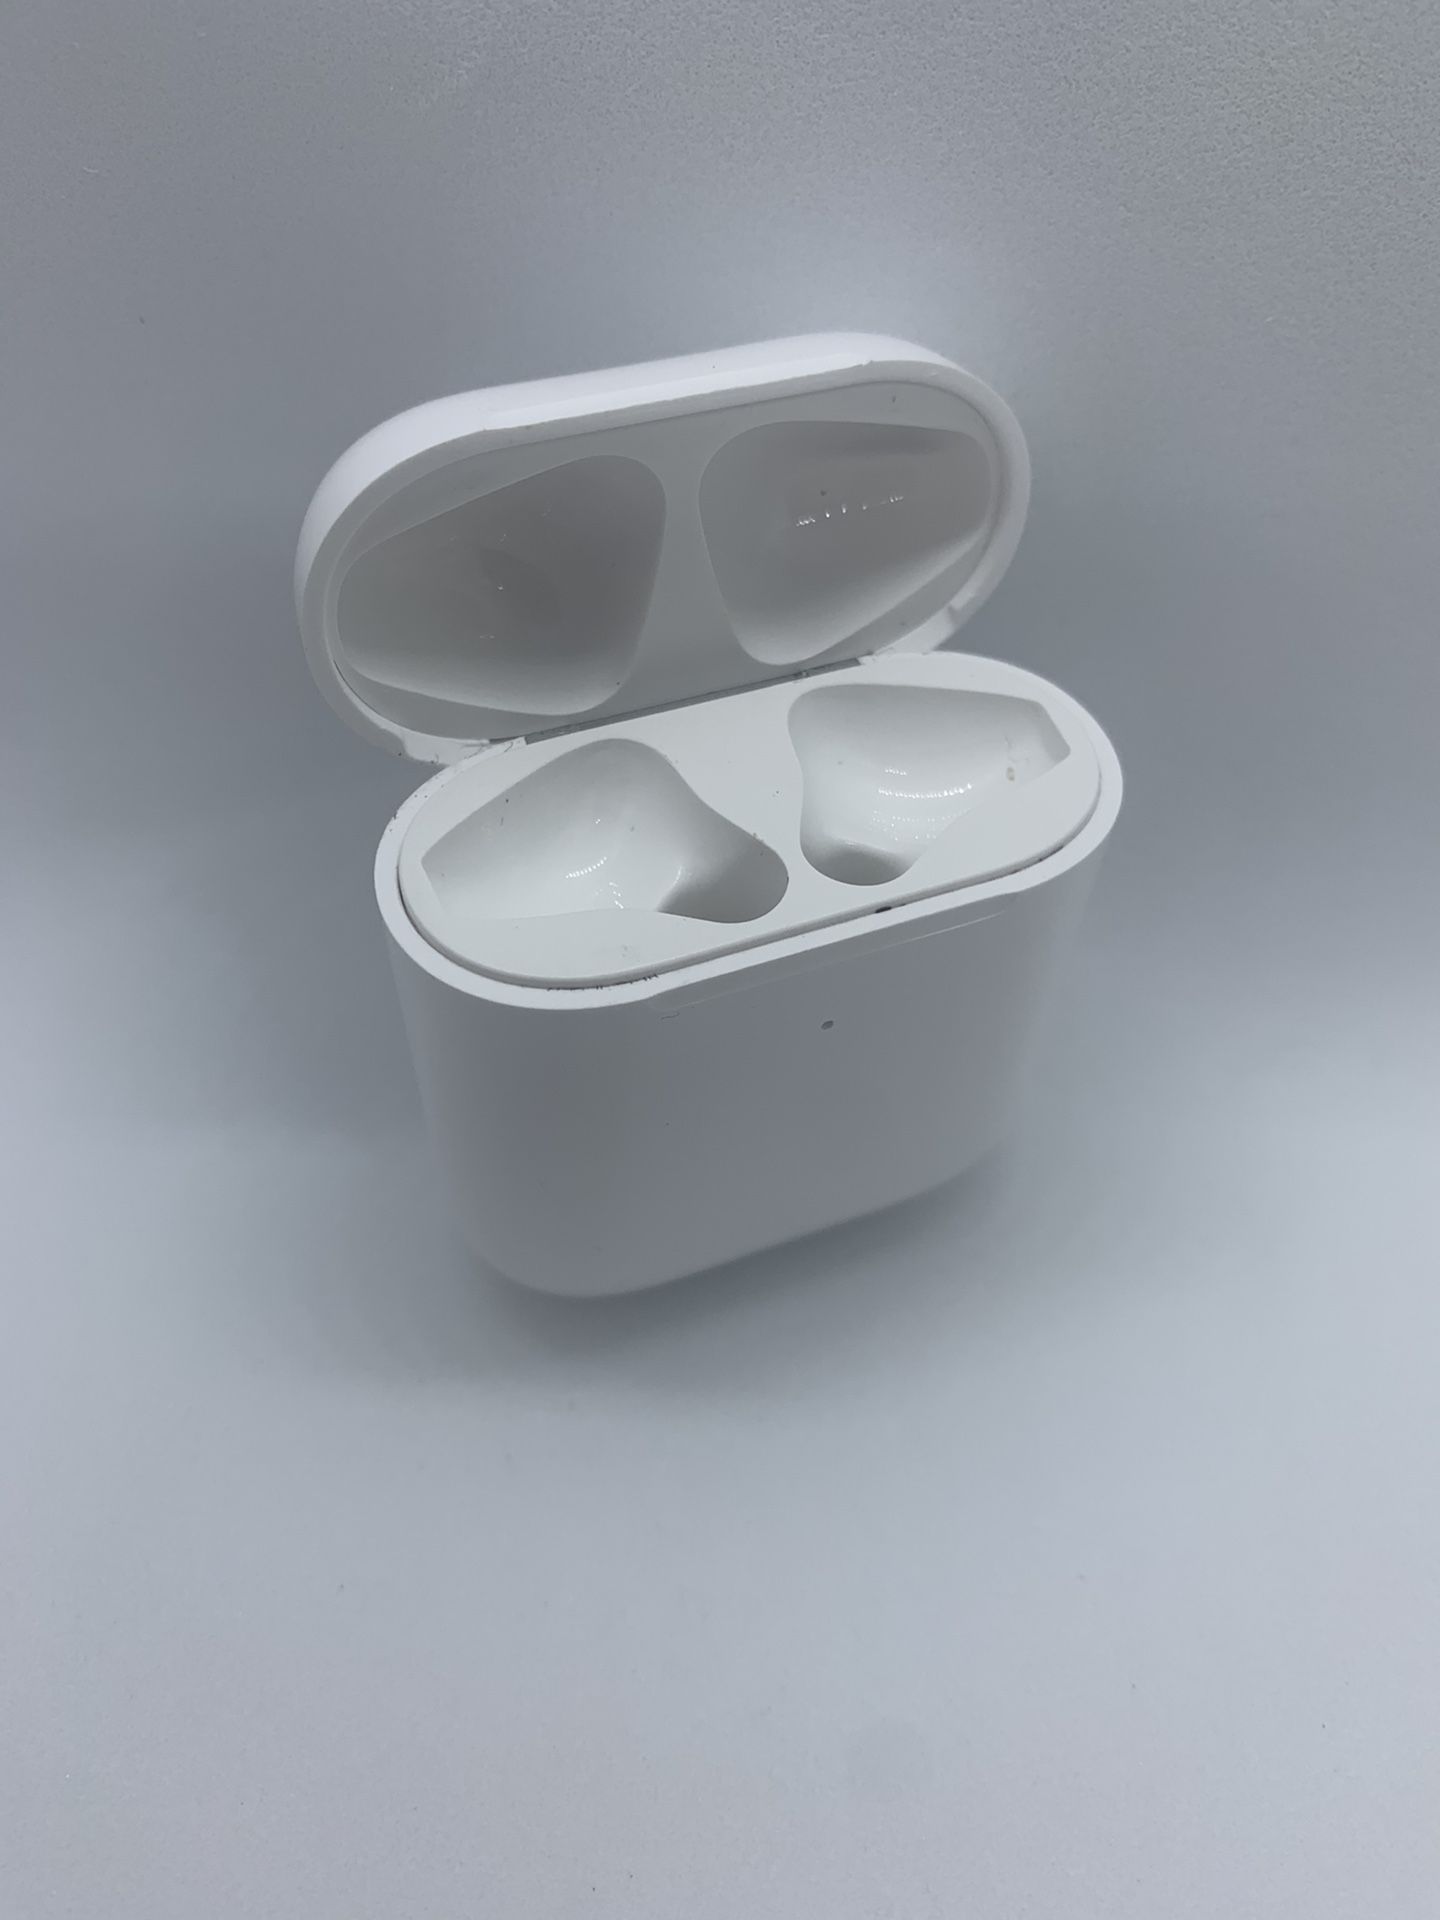 Apple AirPod 2 Wireless Charging Case (airpod 2 case)